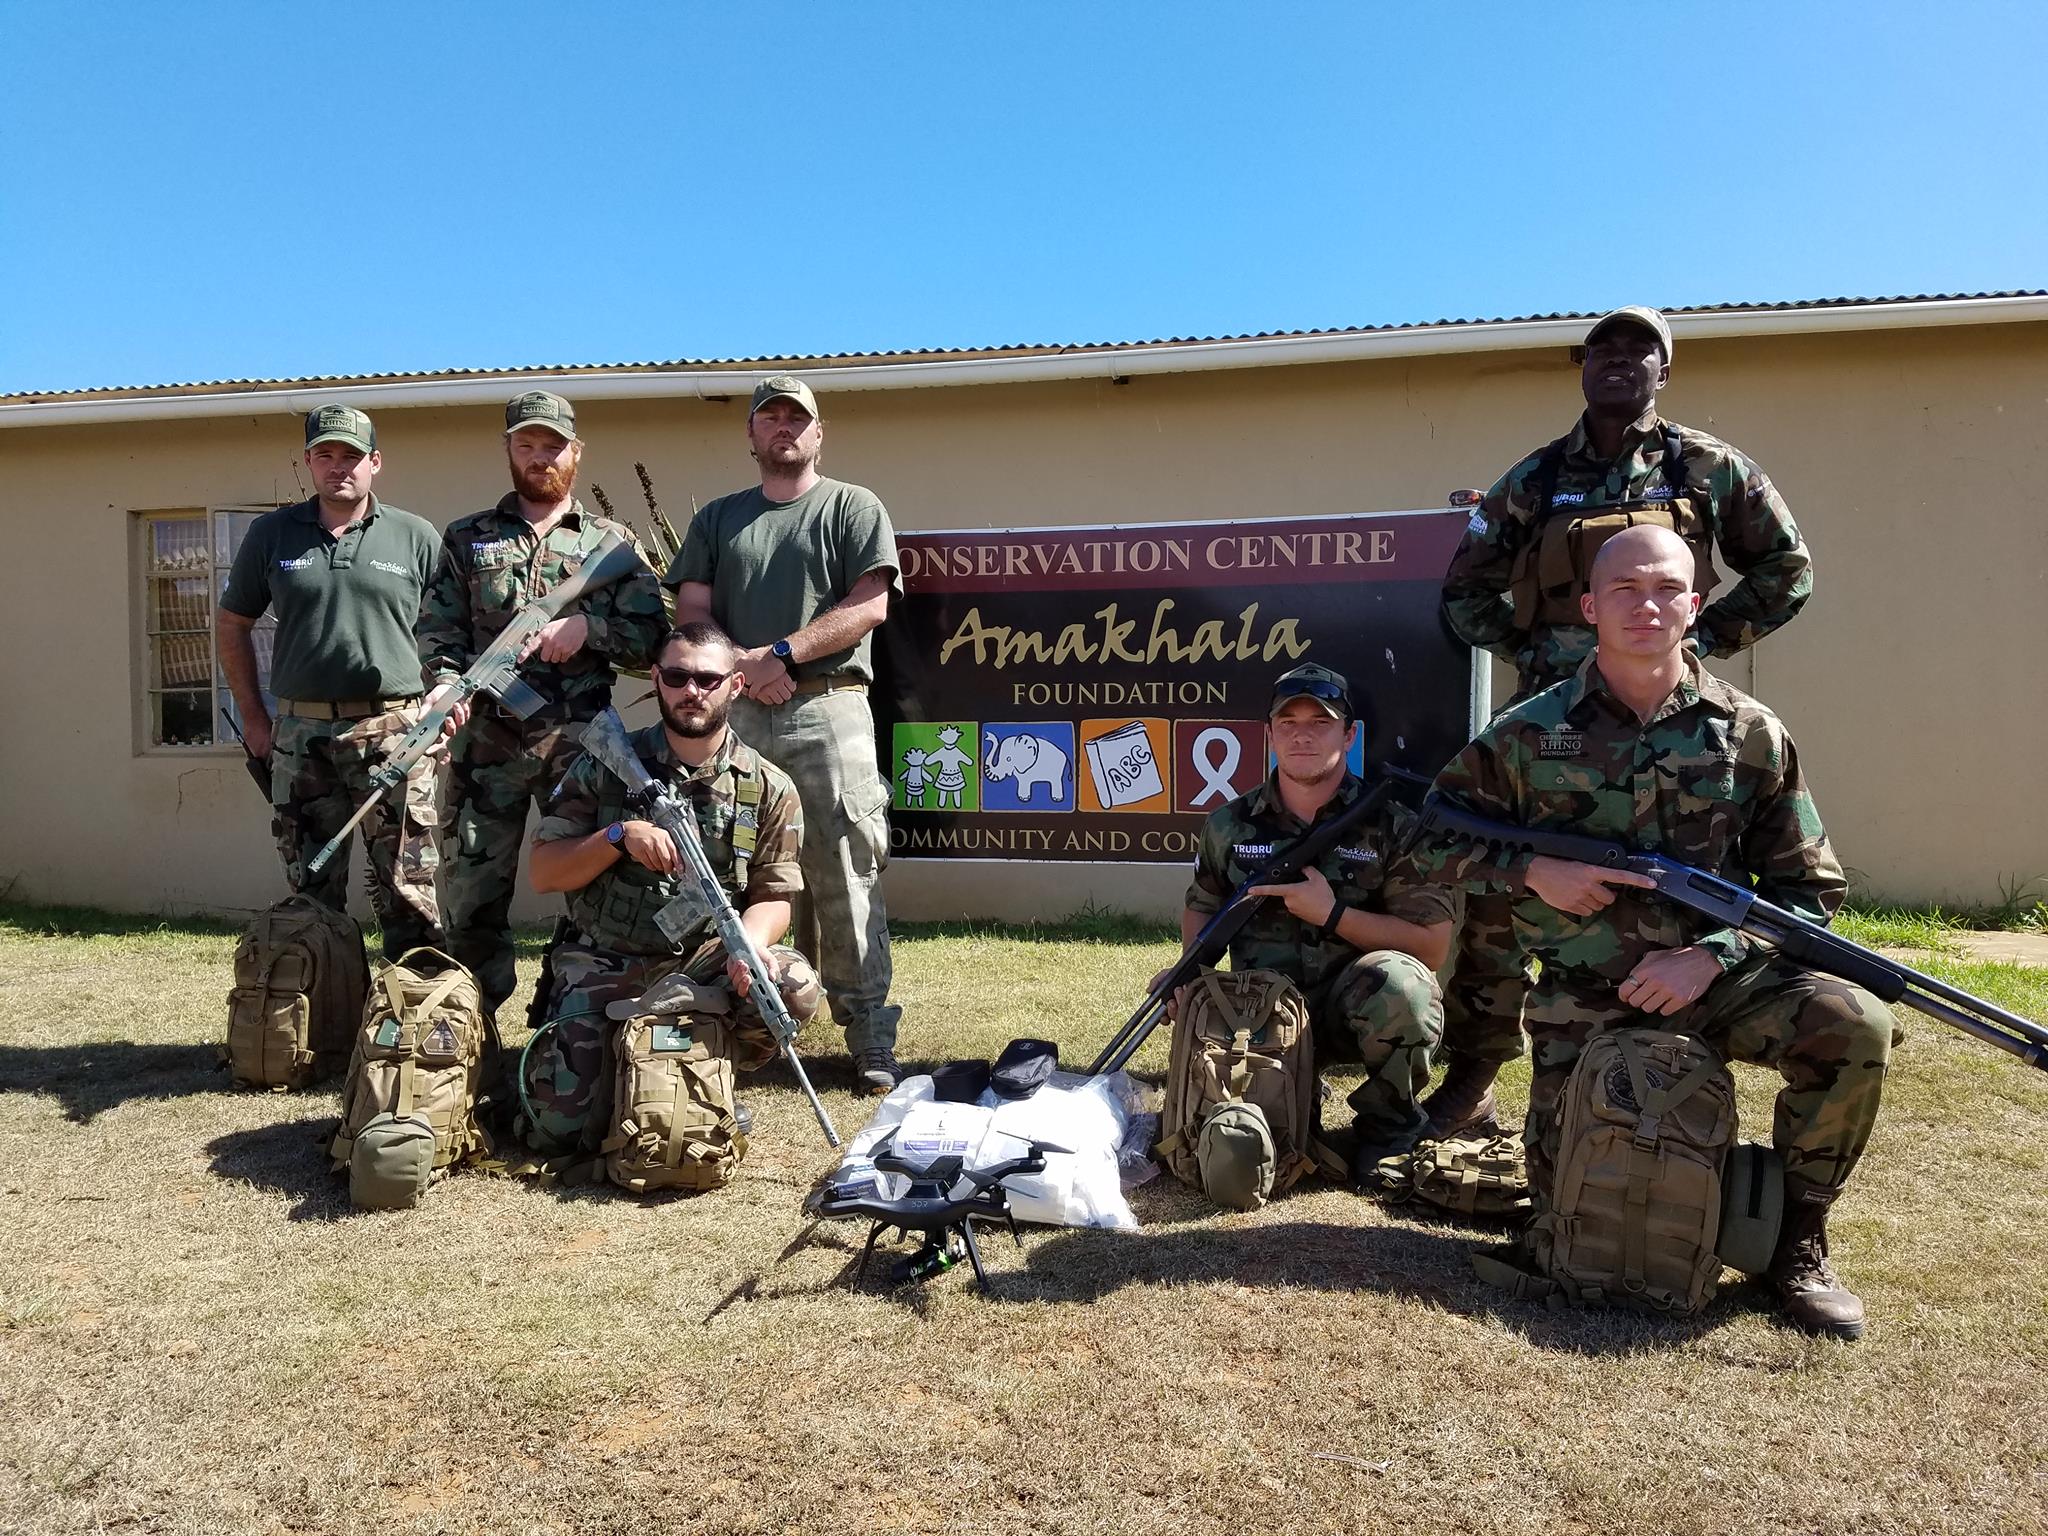 seven rangers posing with equipment in front of a single-story building